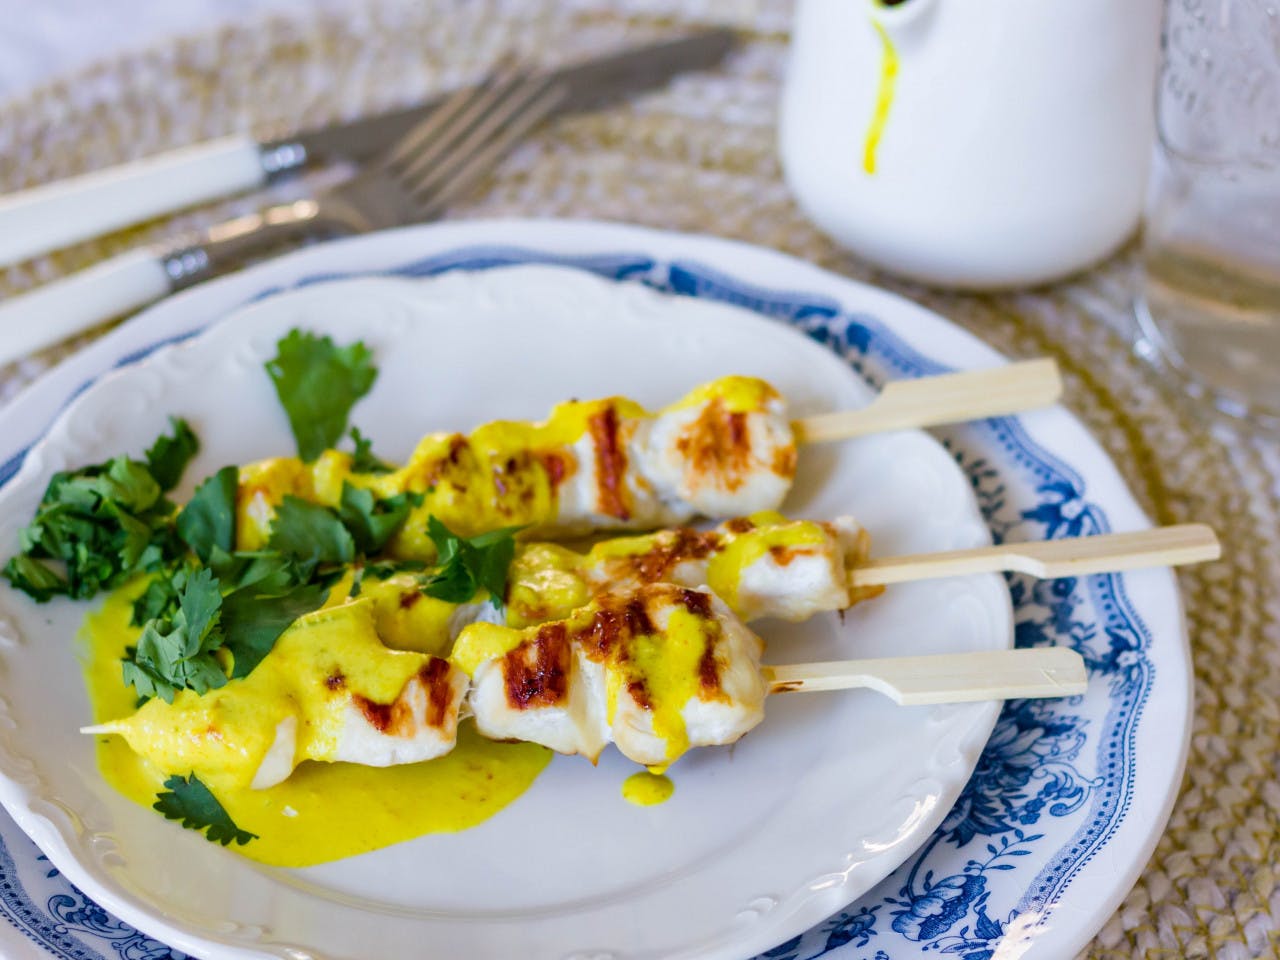 Chicken skewers with curry sauce